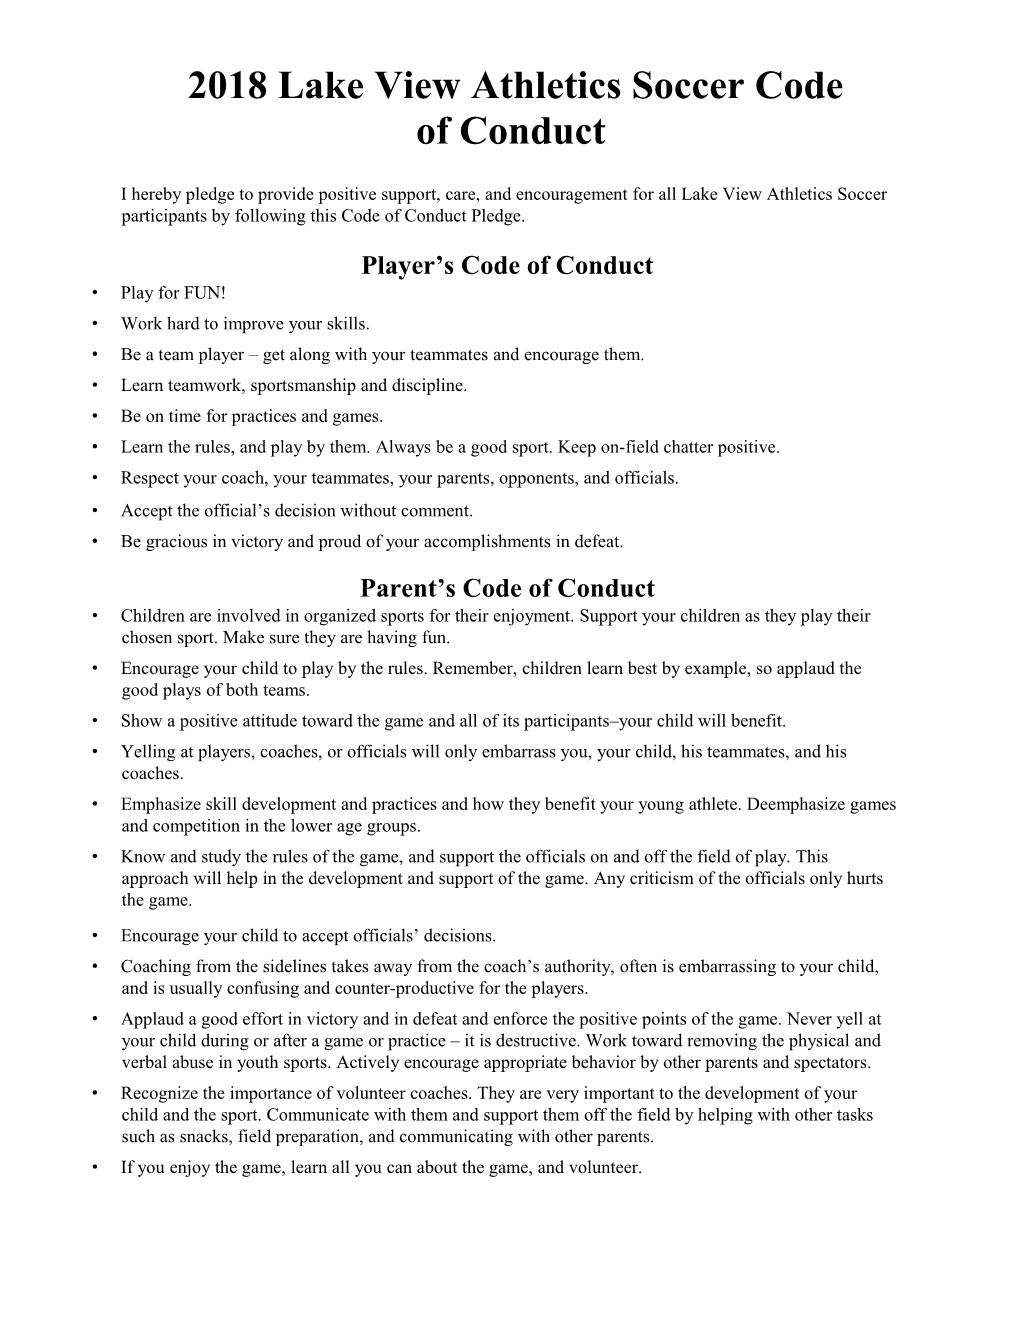 2018 Lake View Athletics Soccer Code of Conduct